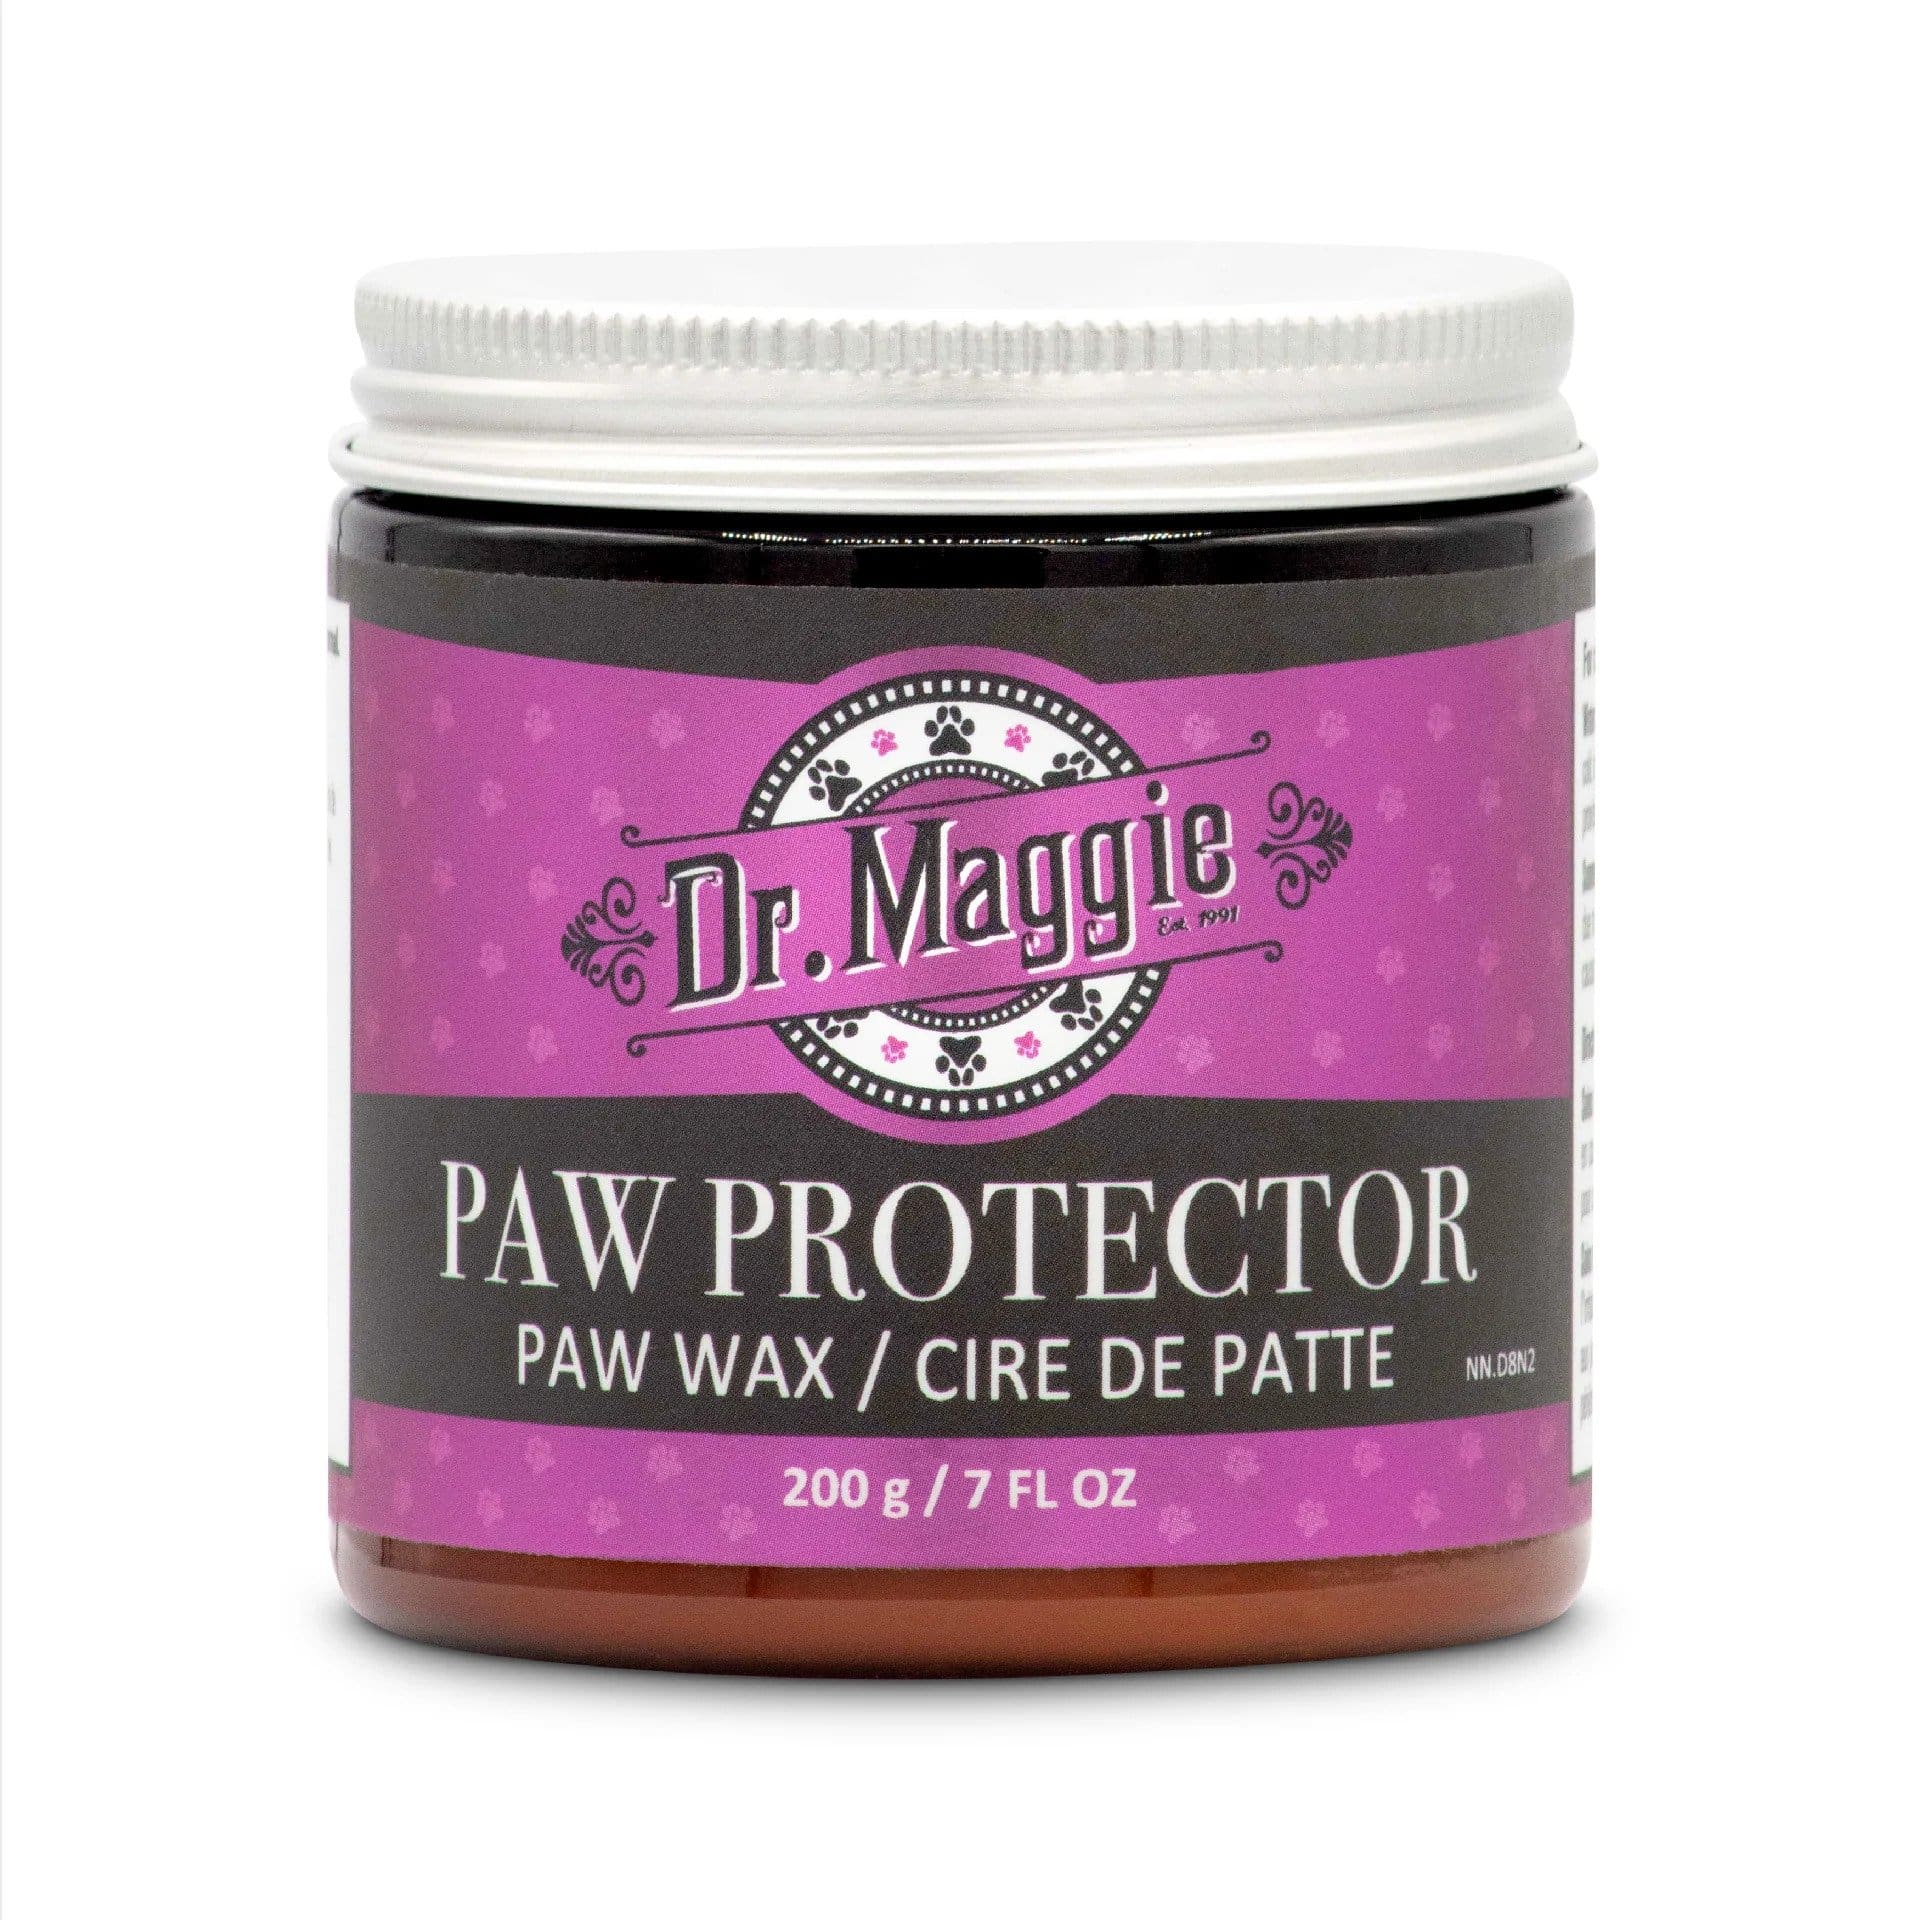 Dr. Maggie Paw Protector Actual